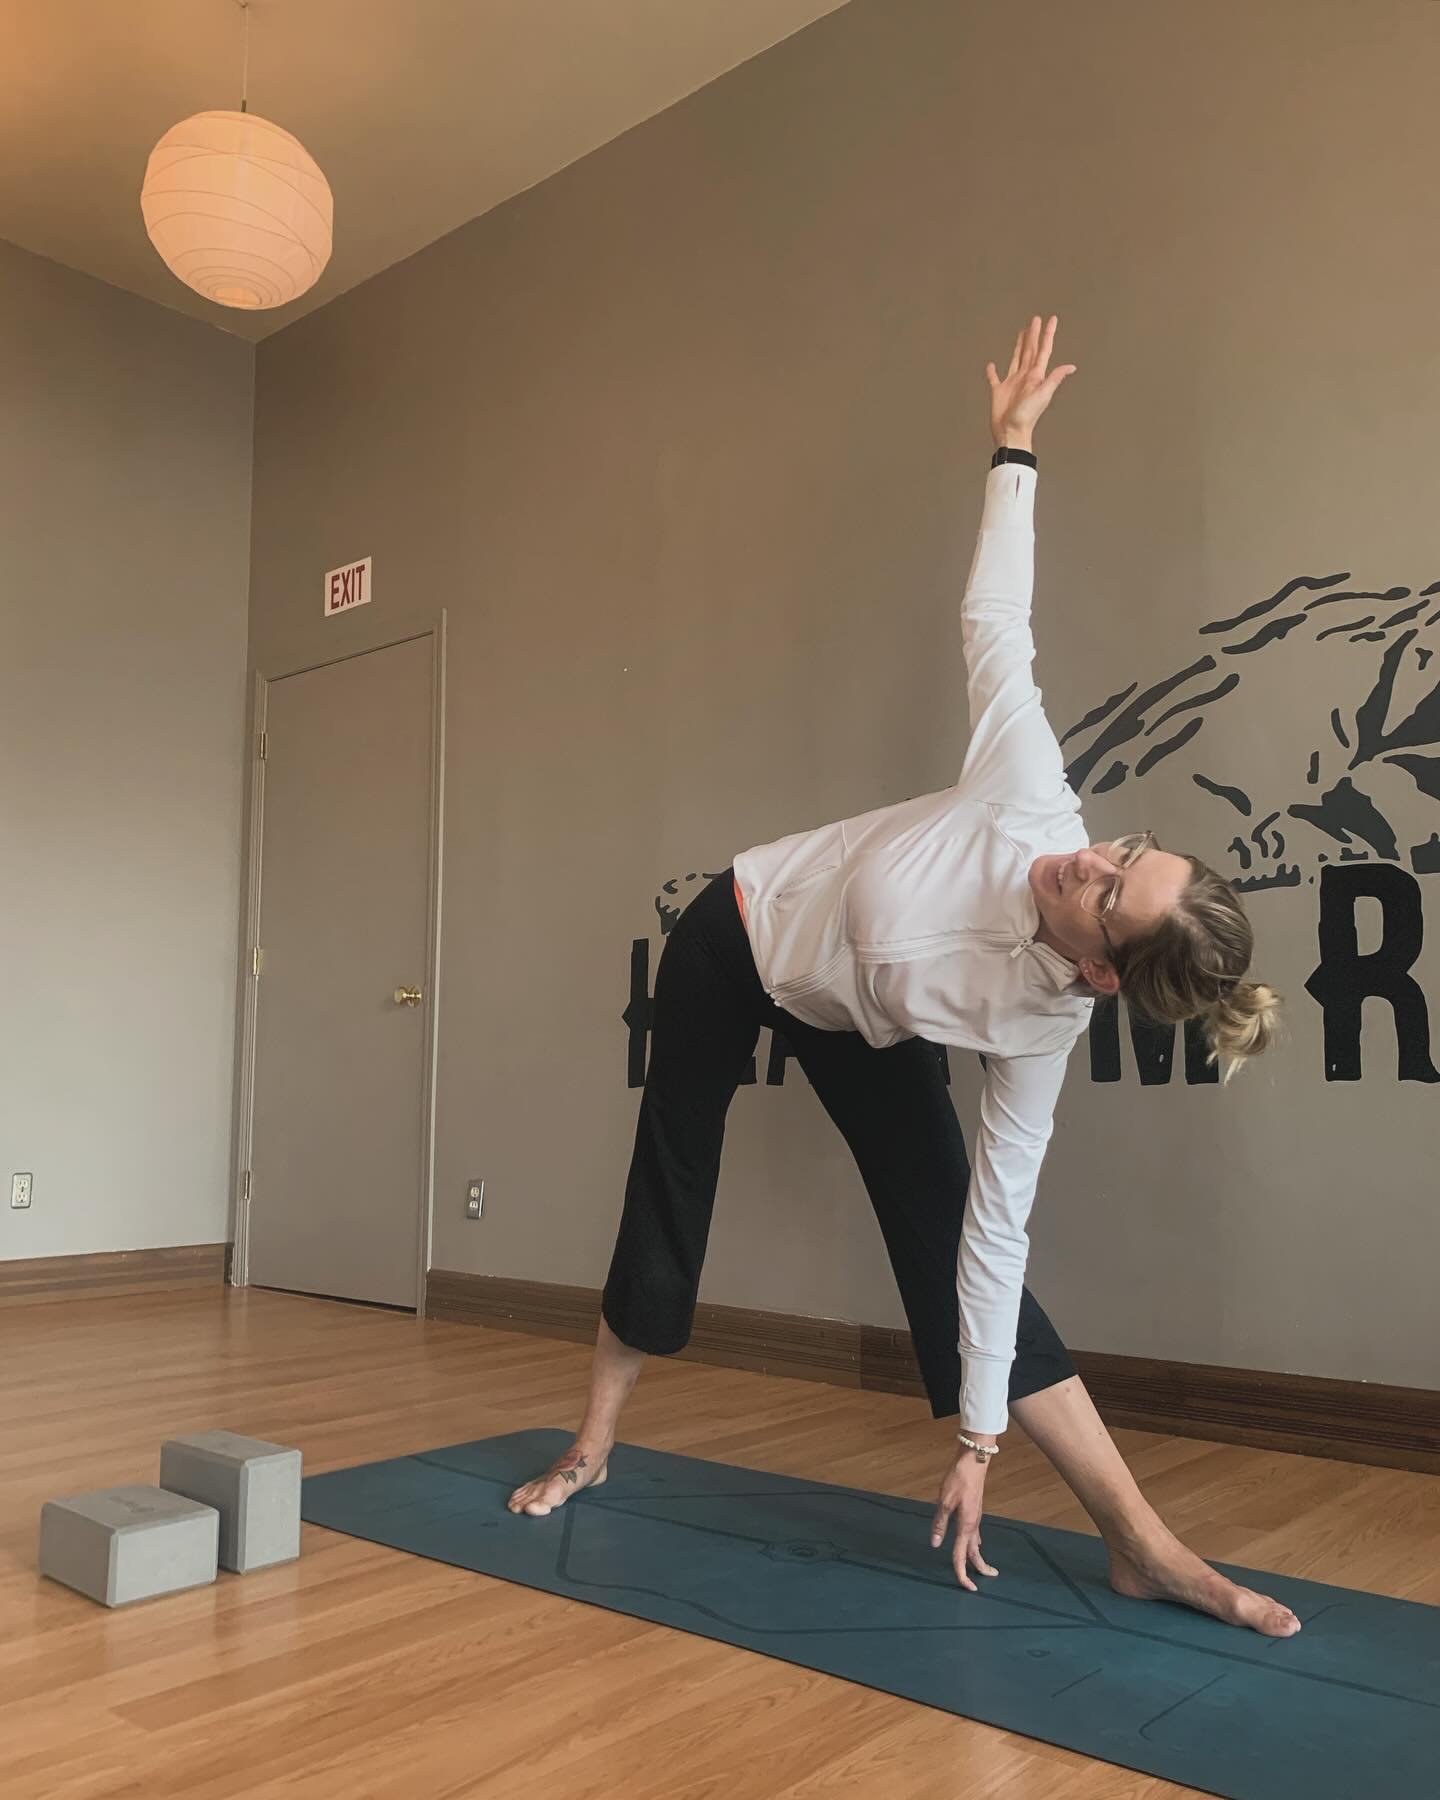 🌞teacher feature: meet Bethany 🌞

We love Bethany! She not only teaches at the studio, but helps out with maintaining the beautiful space and adds so much heart to the community. ❤️

Bethany began her practice by taking yoga classes at her gym when